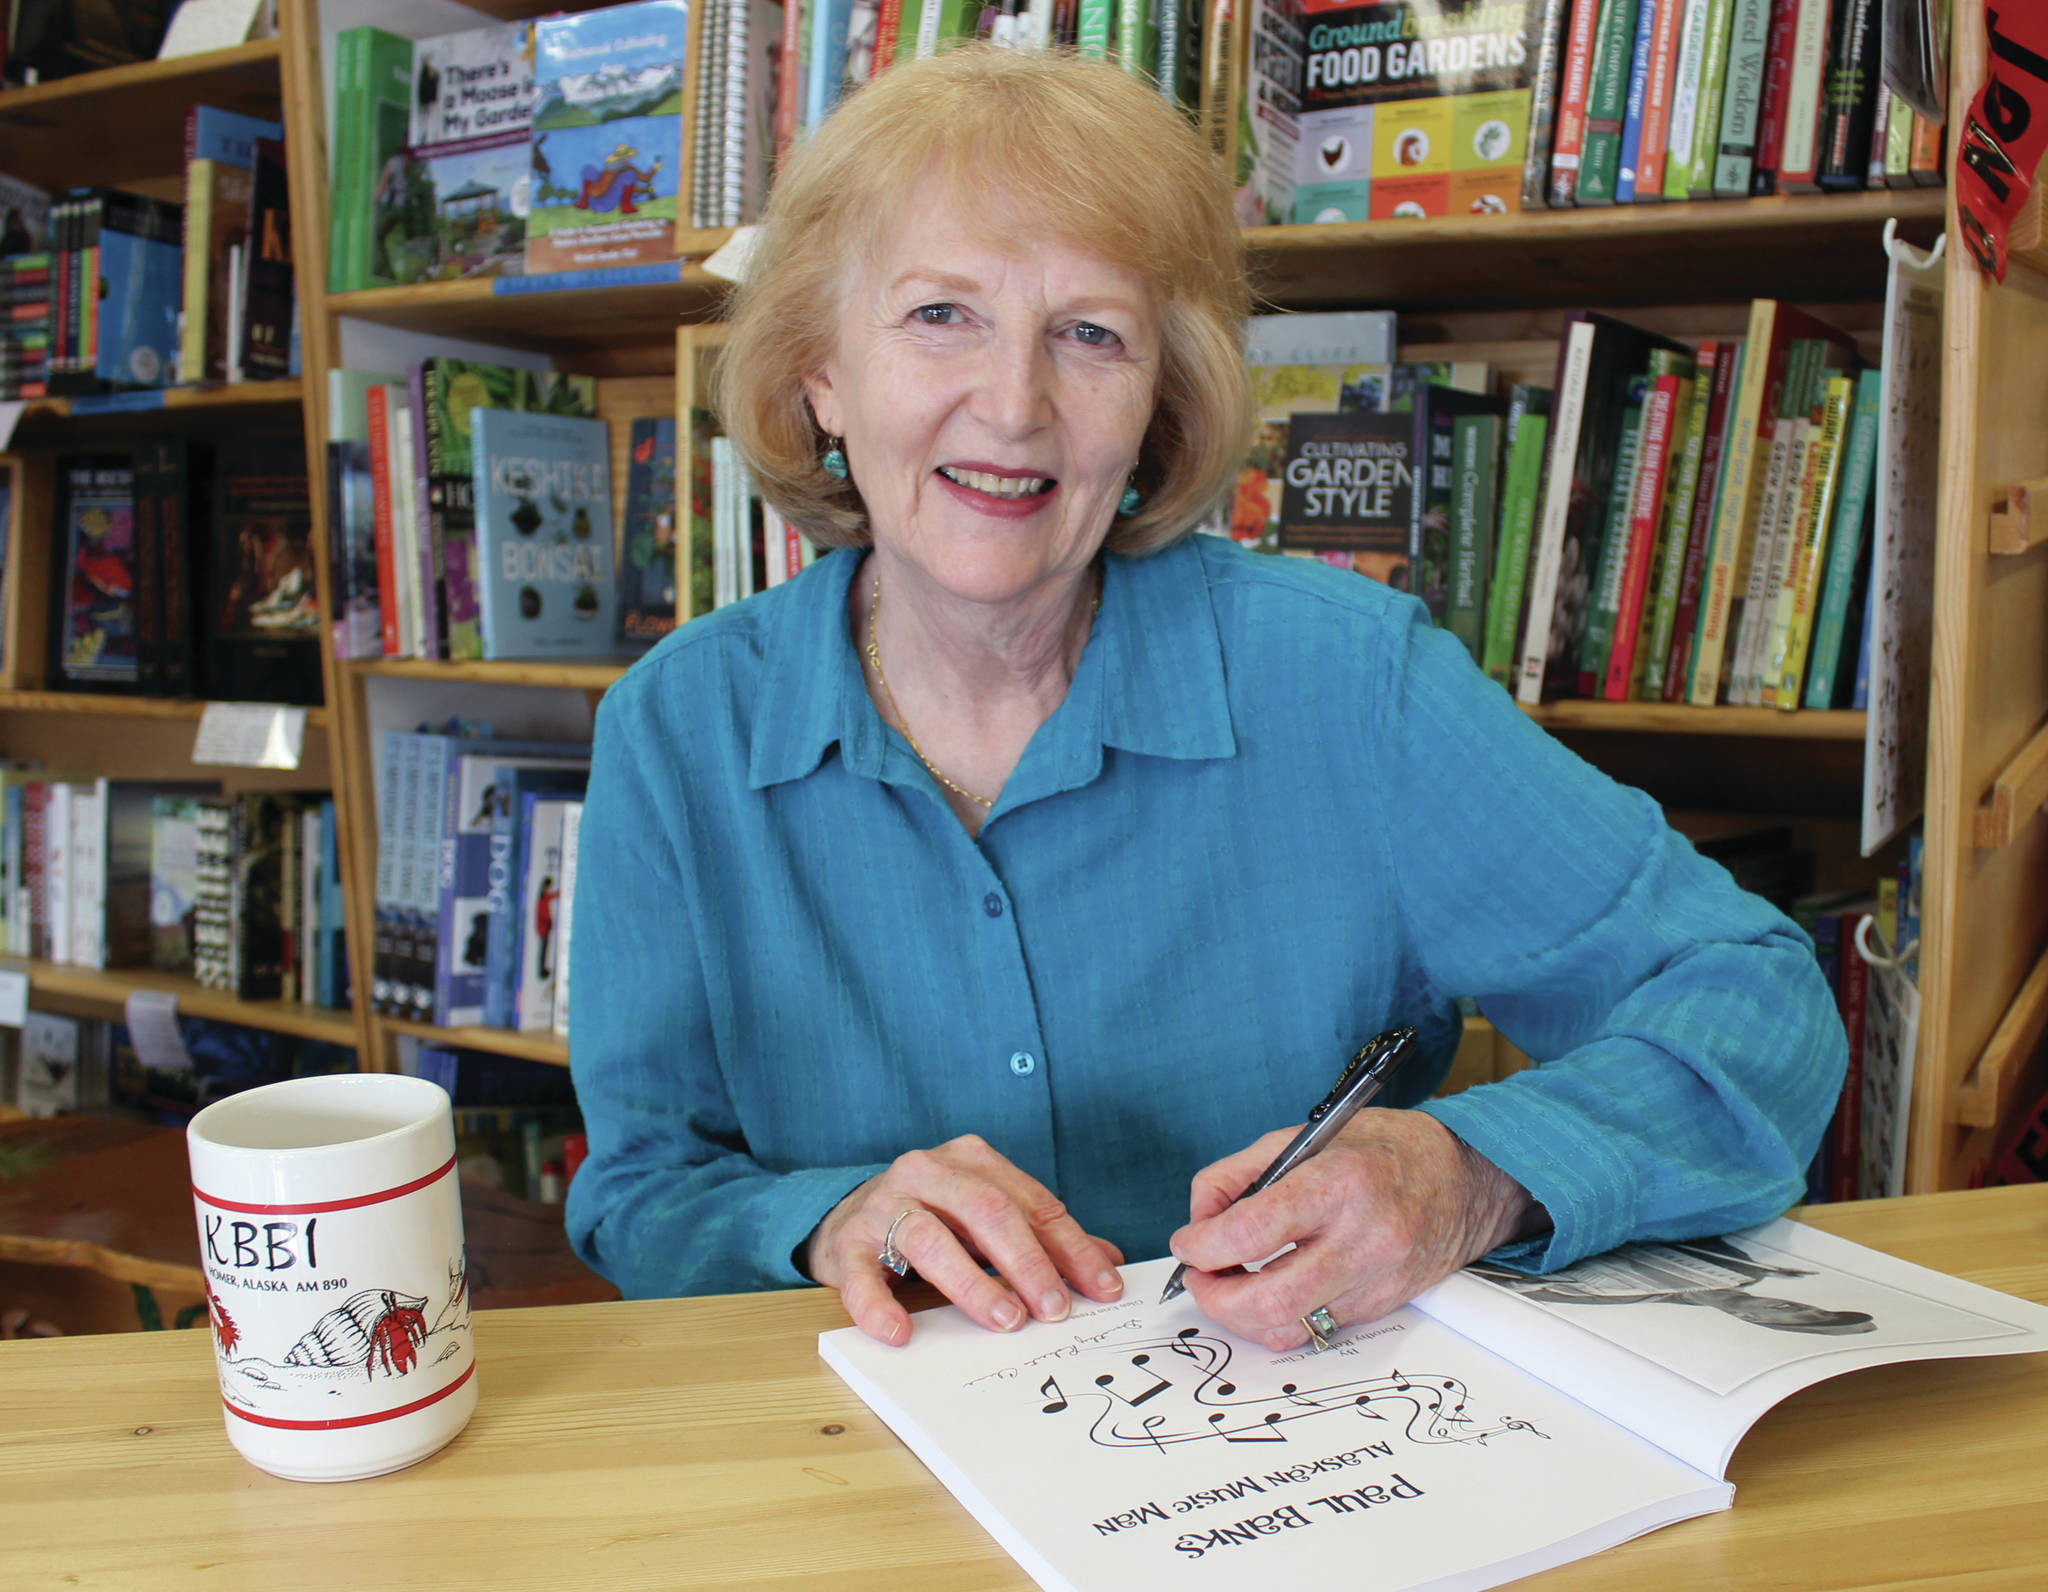 Author Dorothy “Dotty” Cline signs copies of “Paul Banks, Alaskan Music Man” at the Homer Bookstore on Sept. 27, 2014, in Homer, Alaska. (Photo by McKibben Jackinsky / Homer News File)